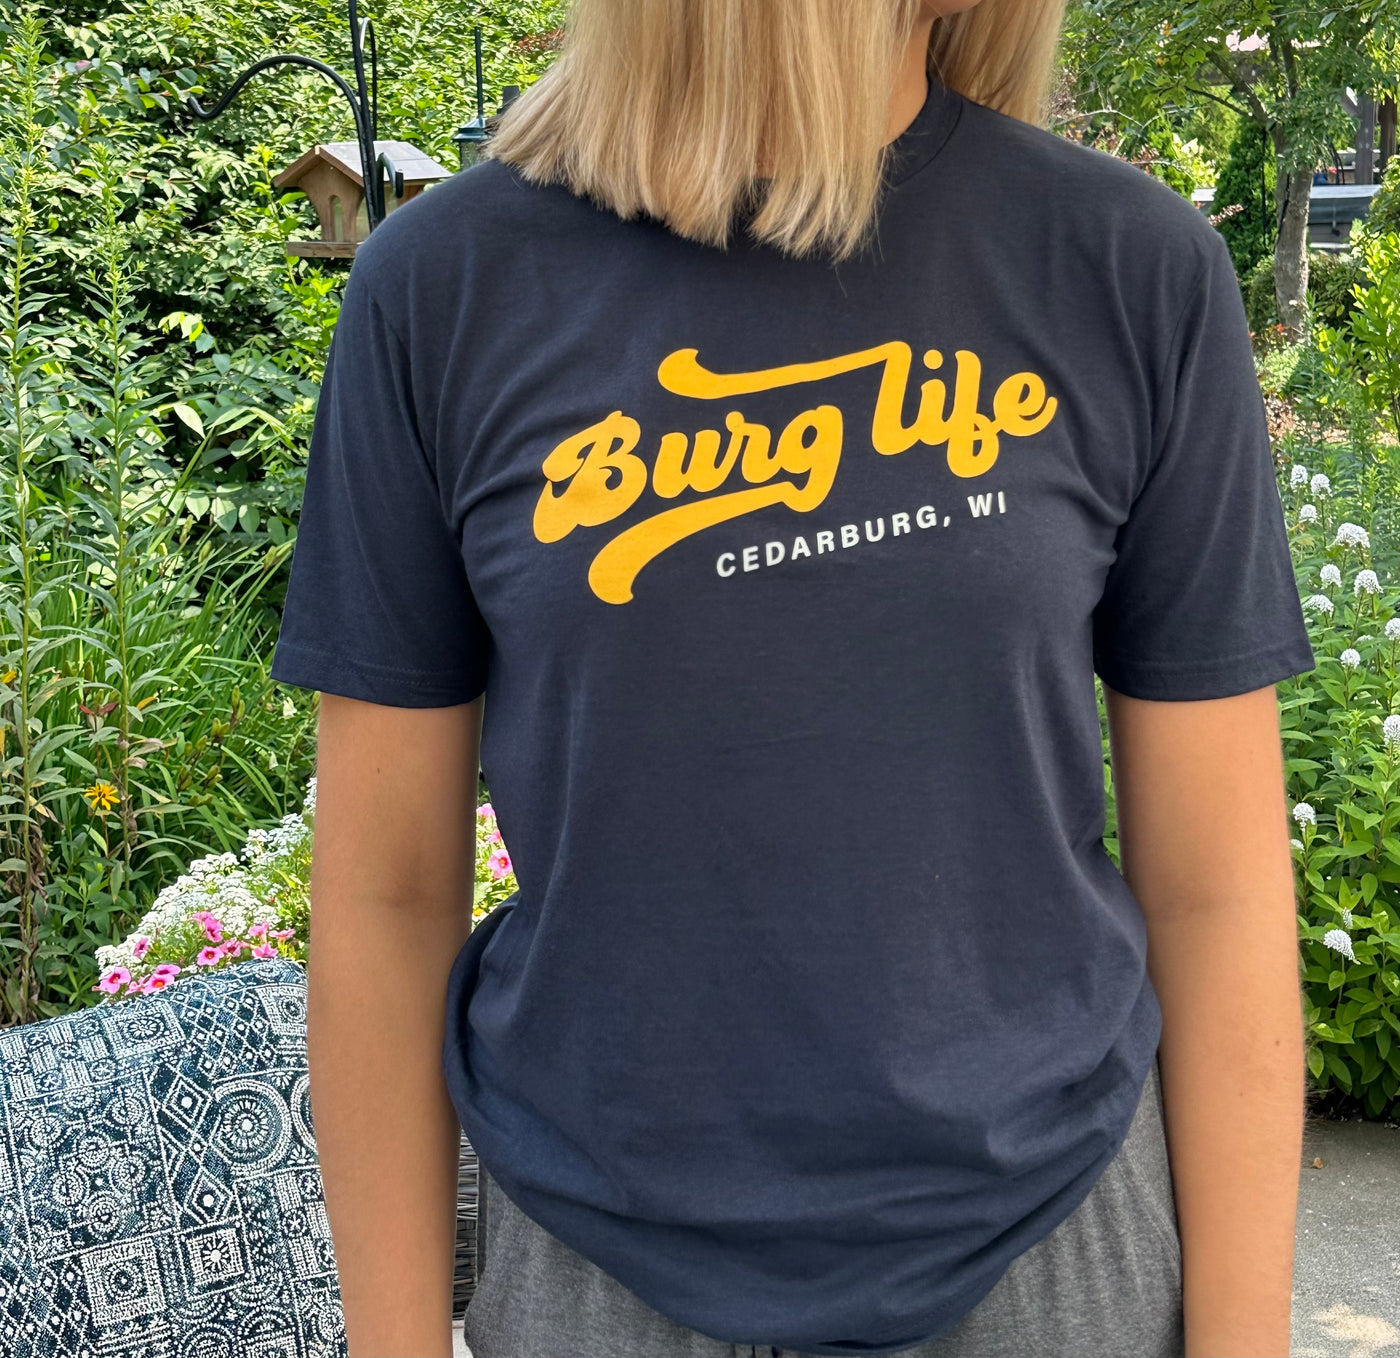 Navy short sleeve unisex tee with yellow and white Burg Life design